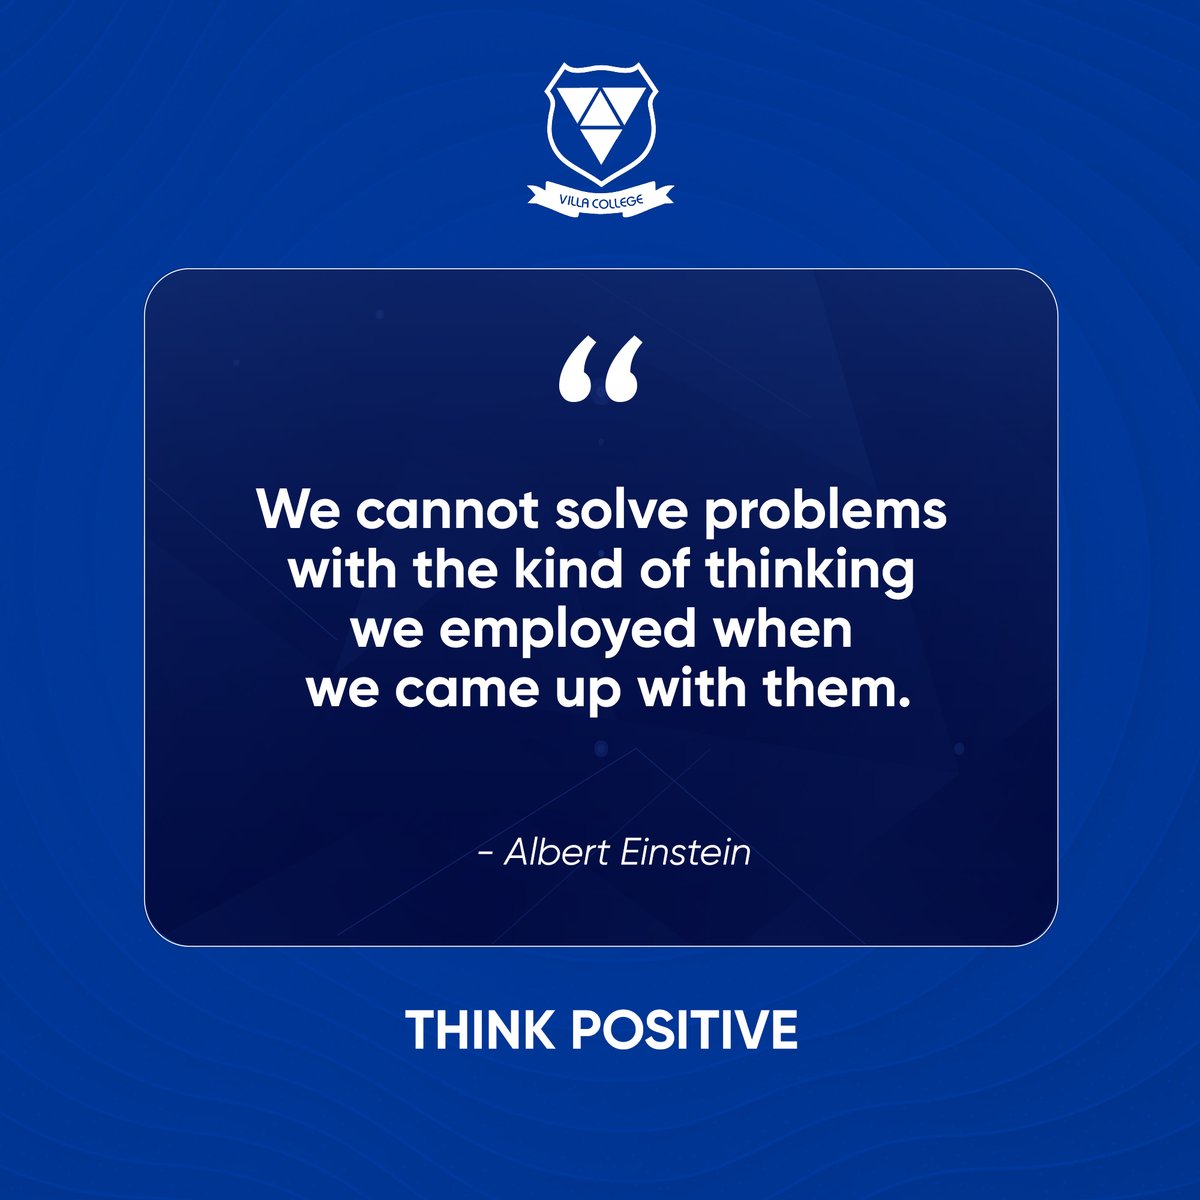 Unlock new solutions by breaking free from old thought patterns. As Albert Einstein said, 'We cannot solve problems with the kind of thinking we employed when we came up with them.' #thinkpositive #positivity #motivation #inspire